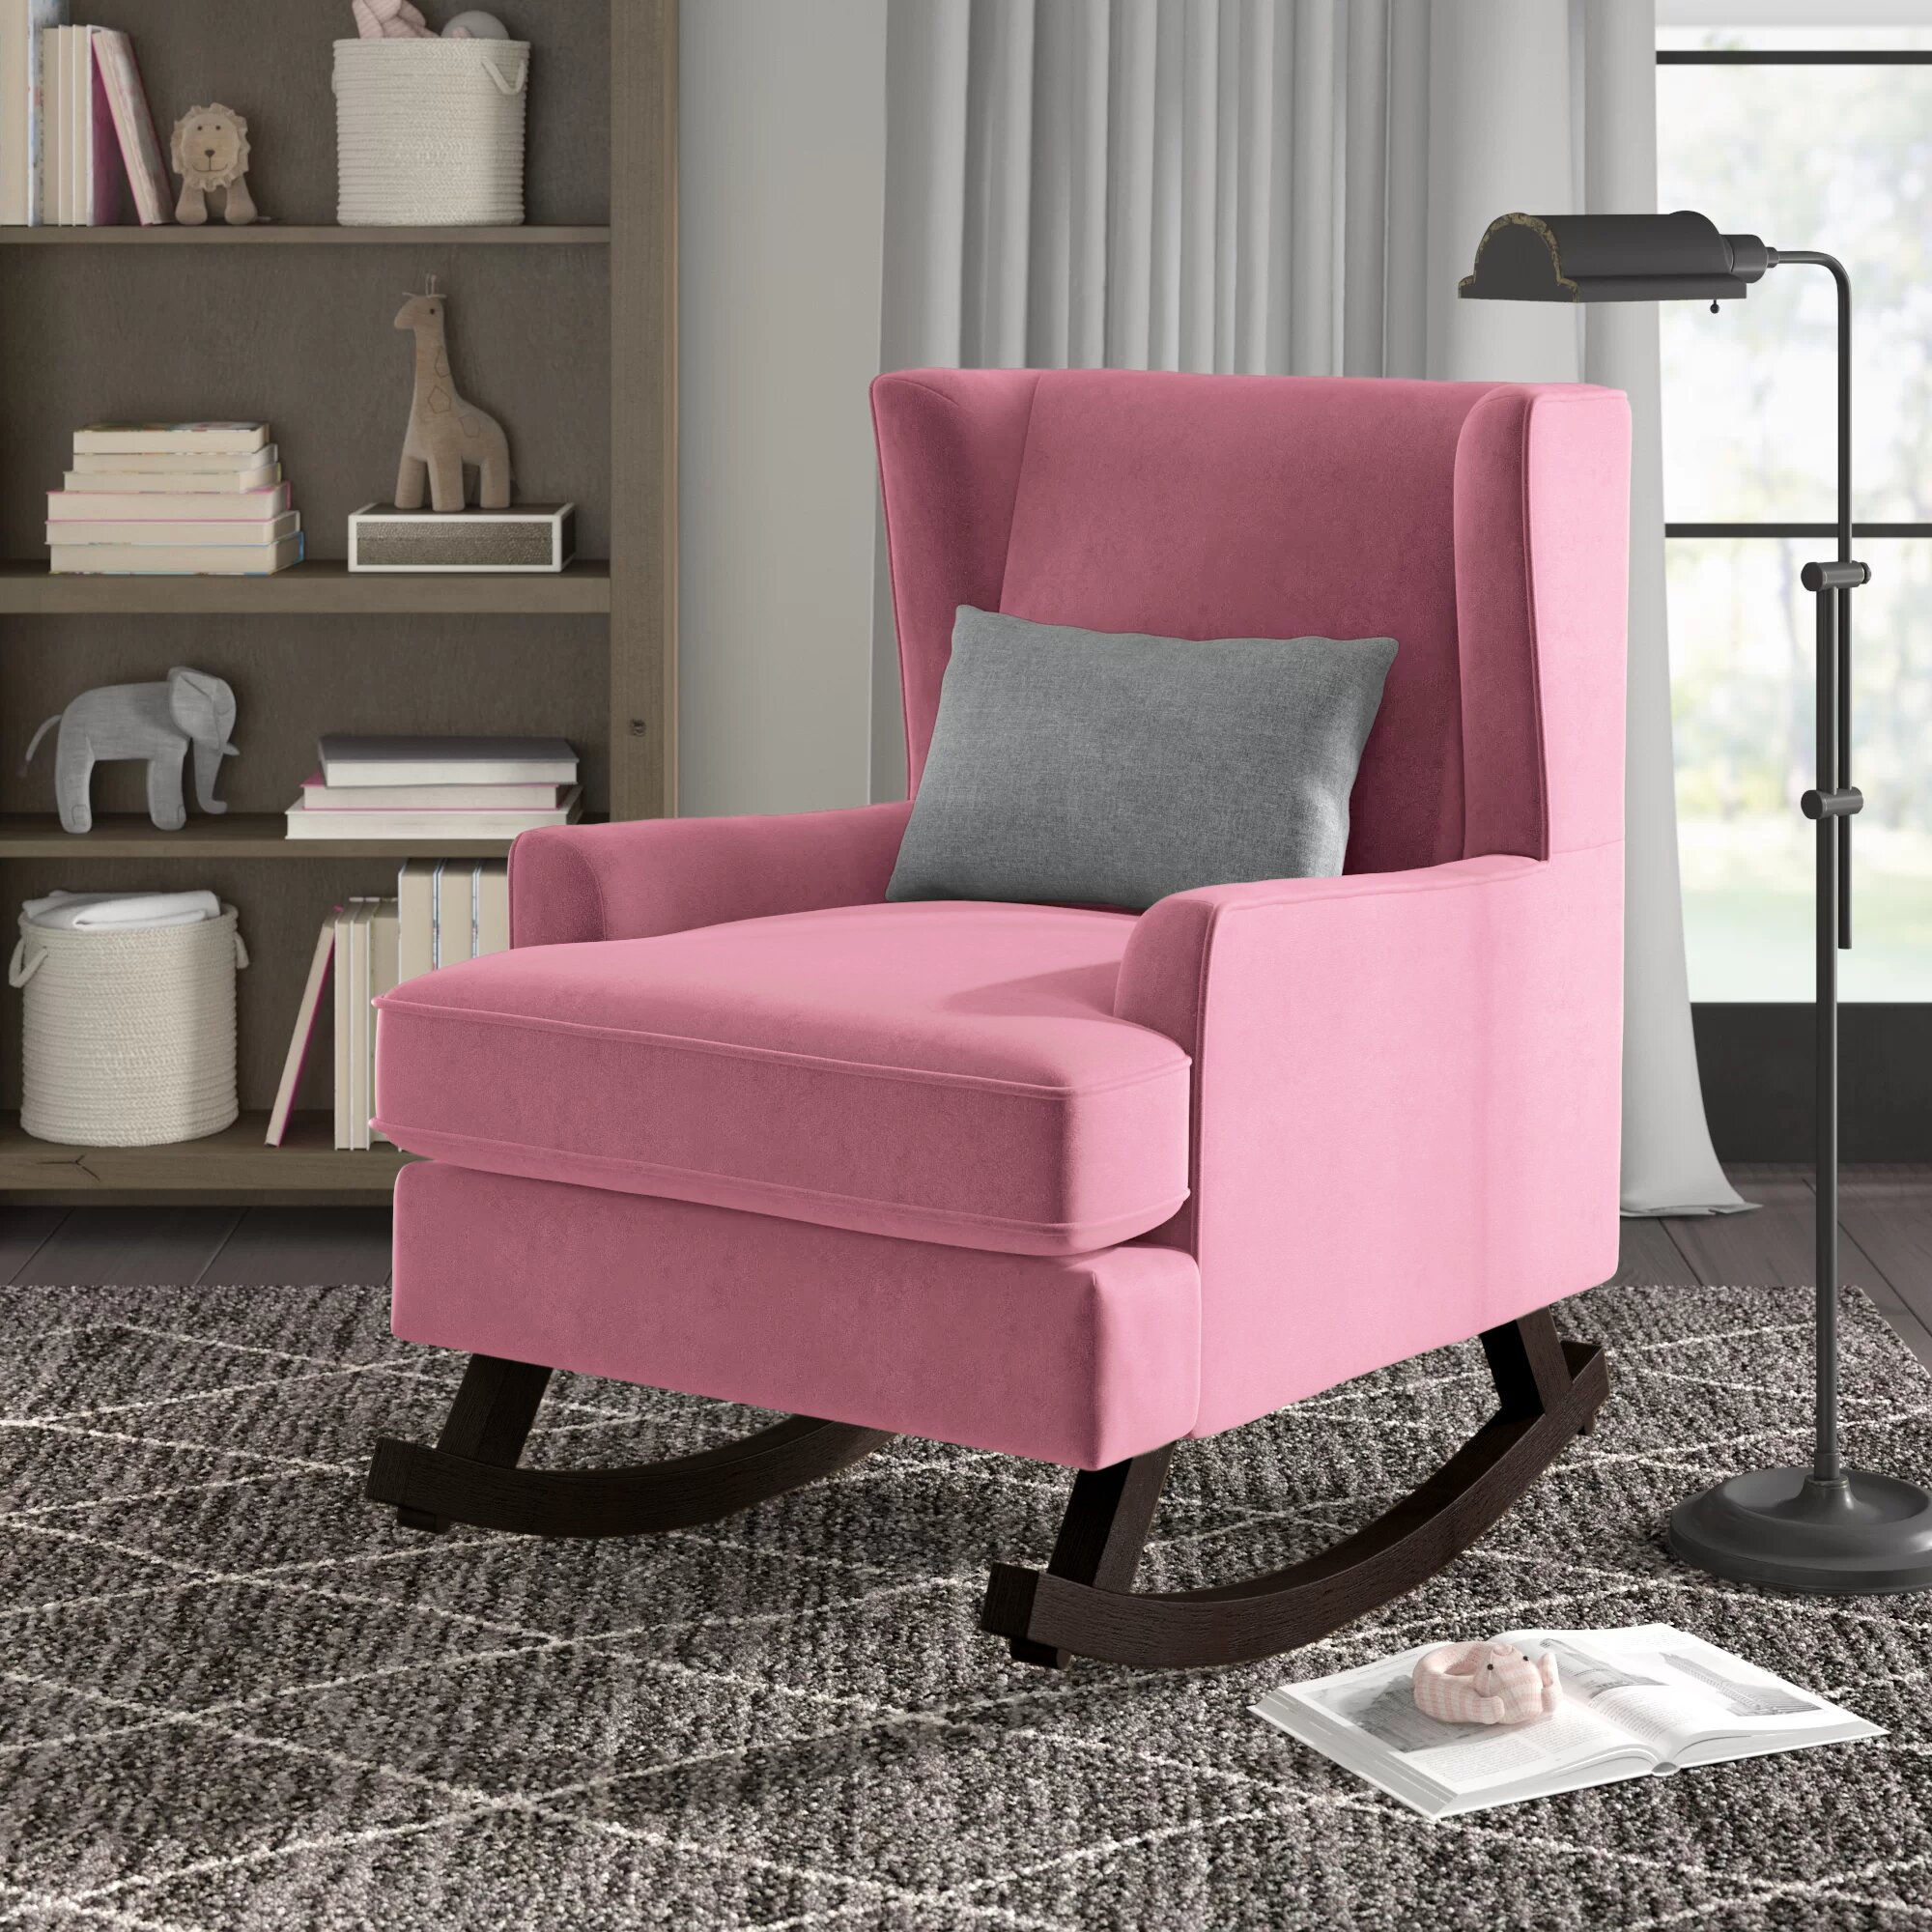 Featured image of post Nursery Pink Rocking Chair : Dark or white wood frame with pink, blue, navy, brown, white or cream cushions.